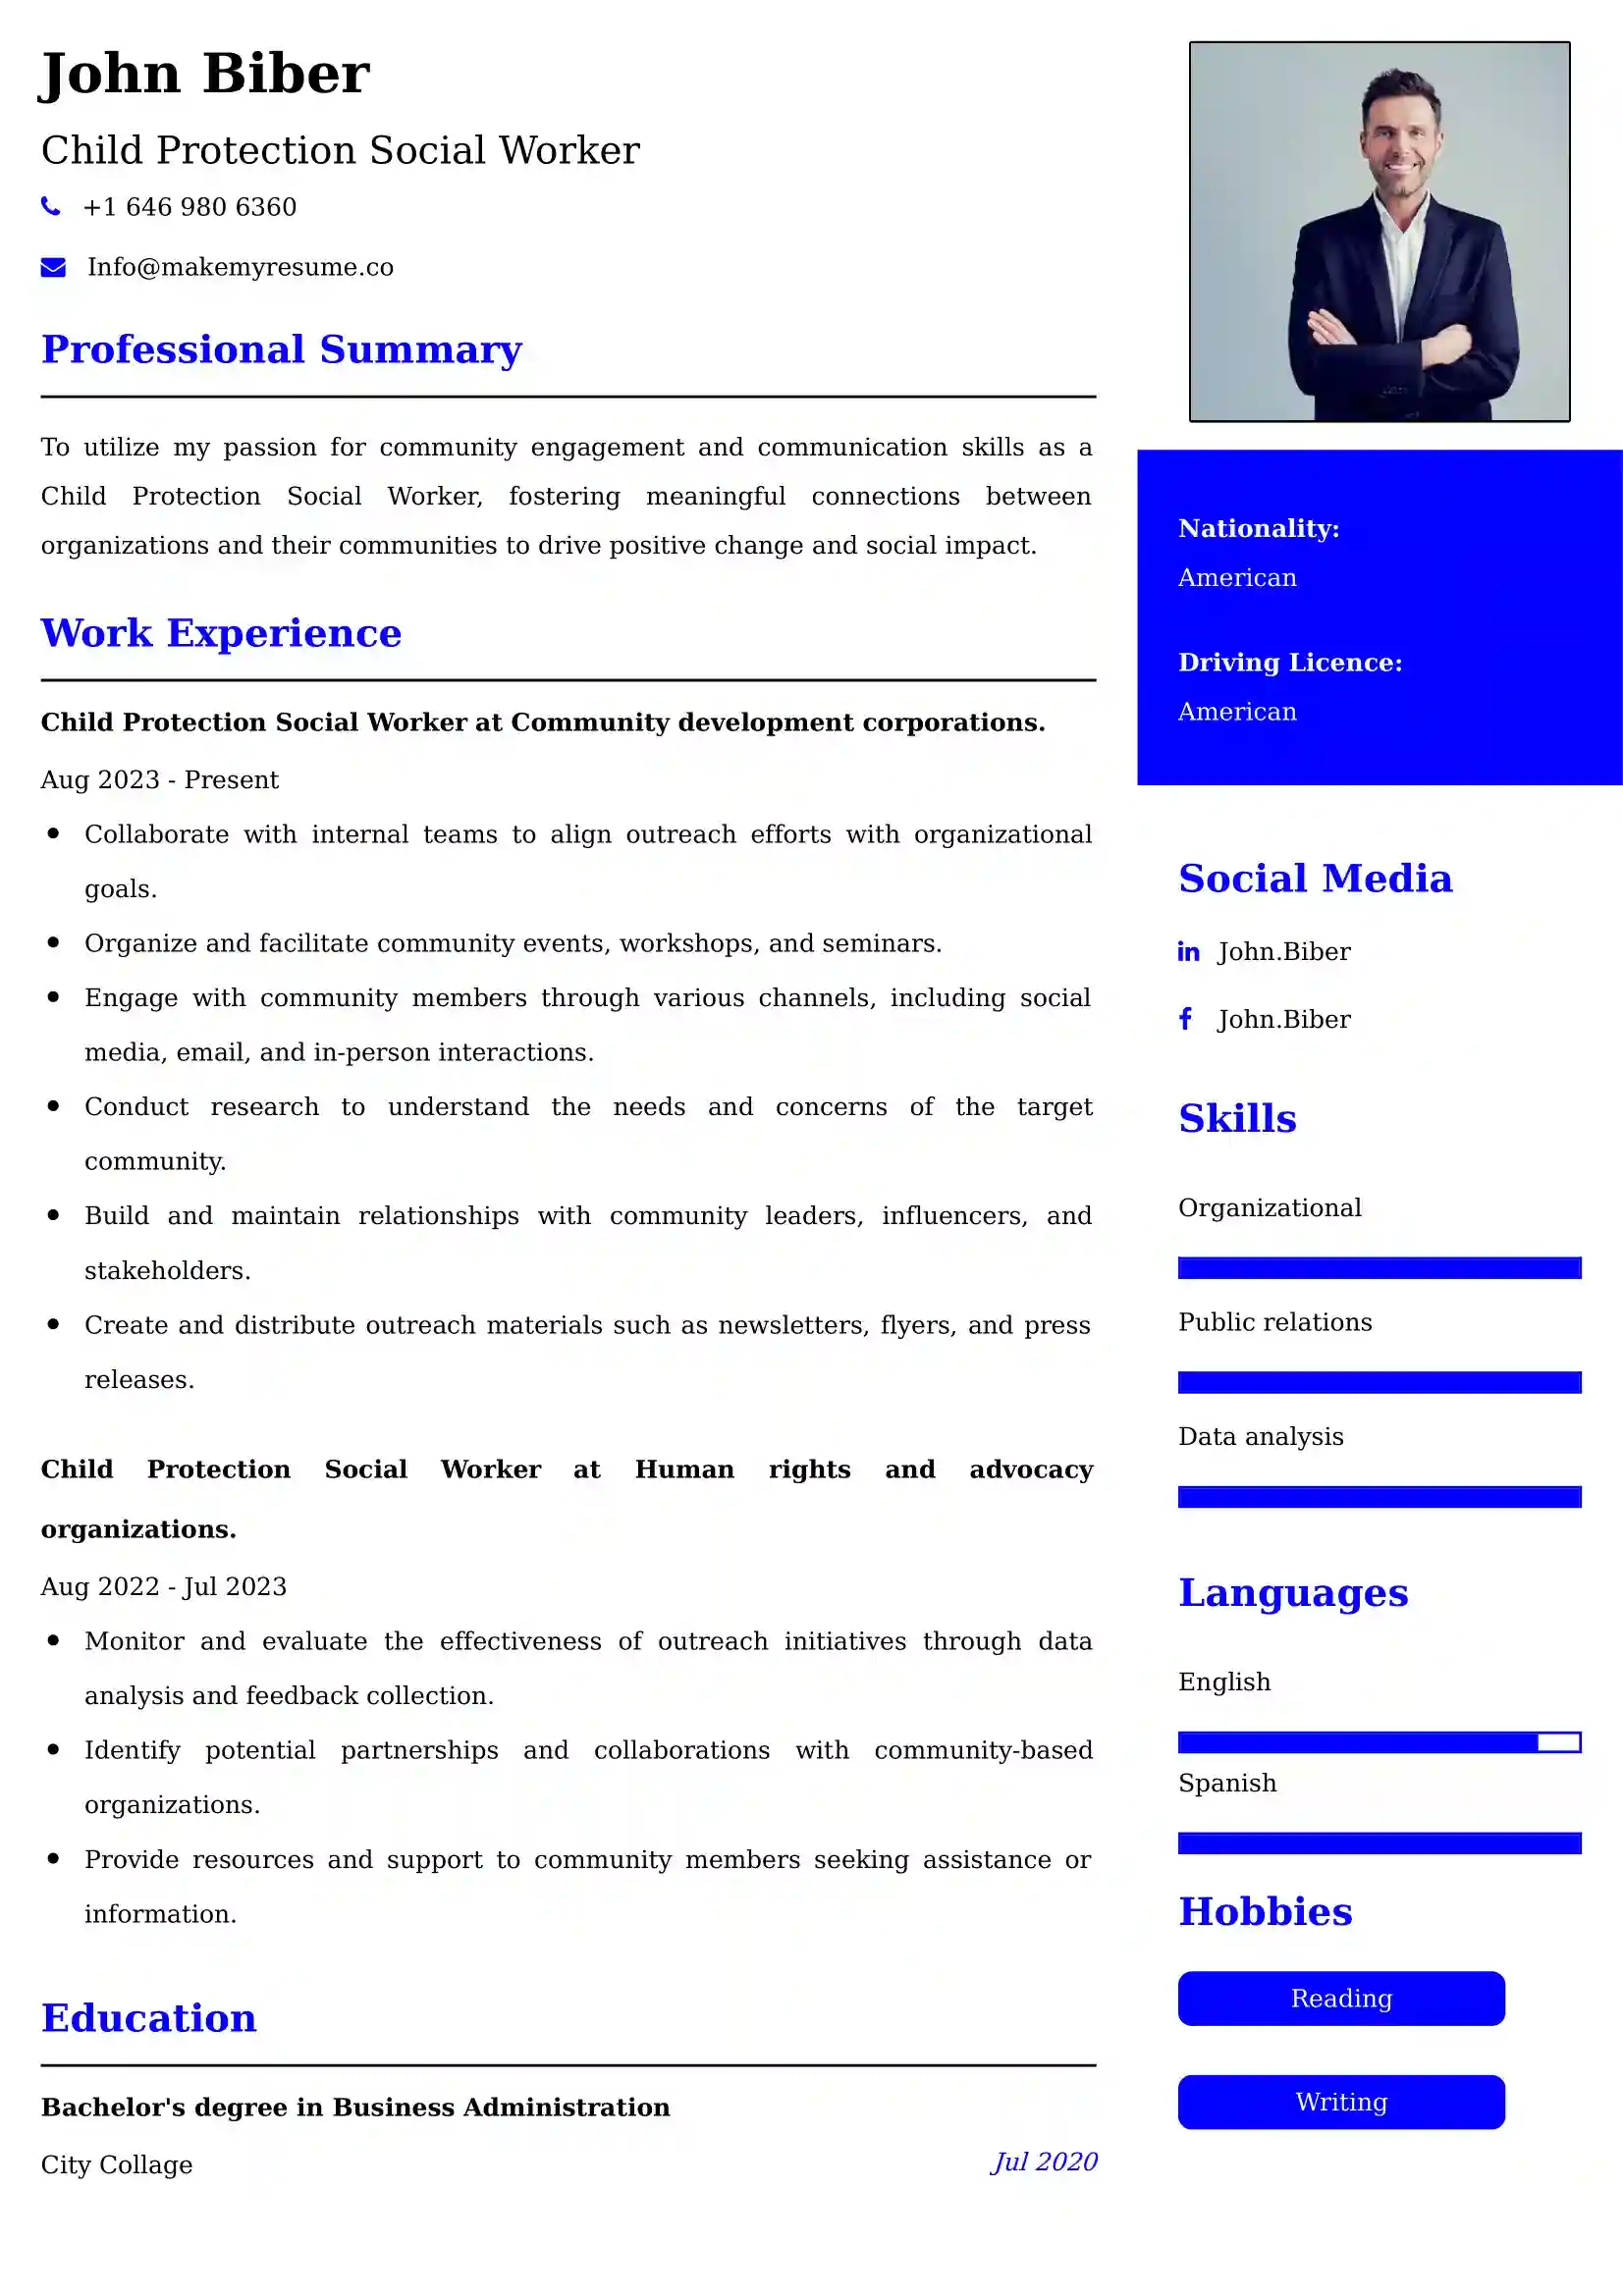 Child Protection Social Worker Resume Examples - Australian Format and Tips